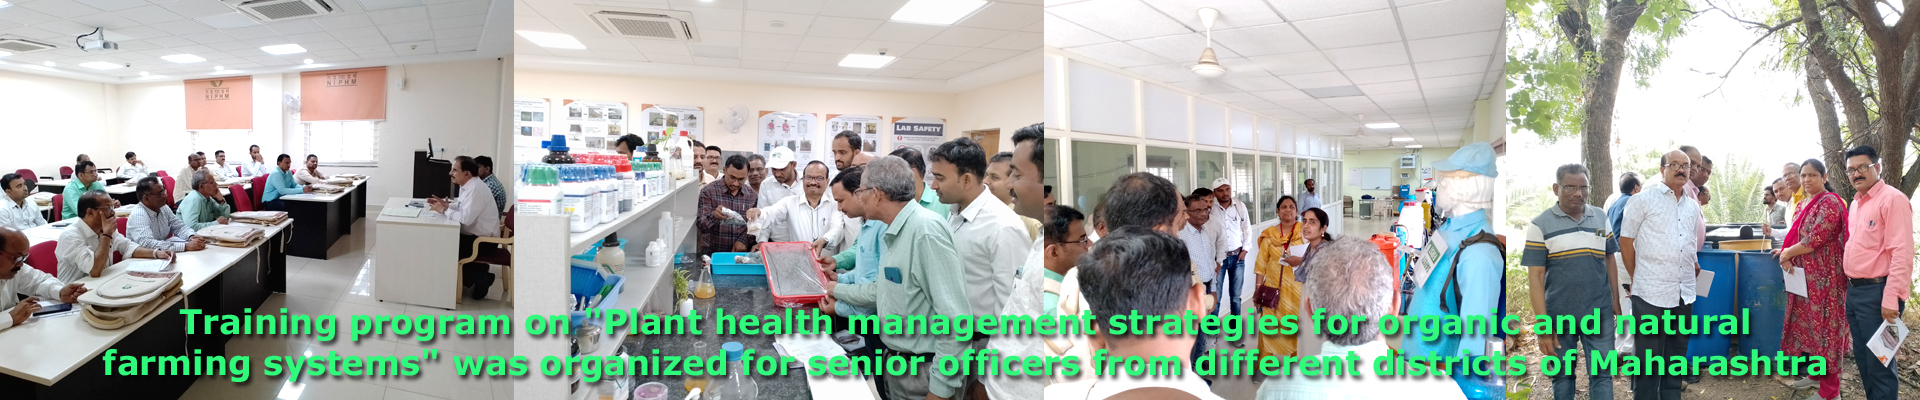 Training program on 'Plant health management strategies for organic and natural farming systems' was organized for senior officers from different districts of Maharashtra.